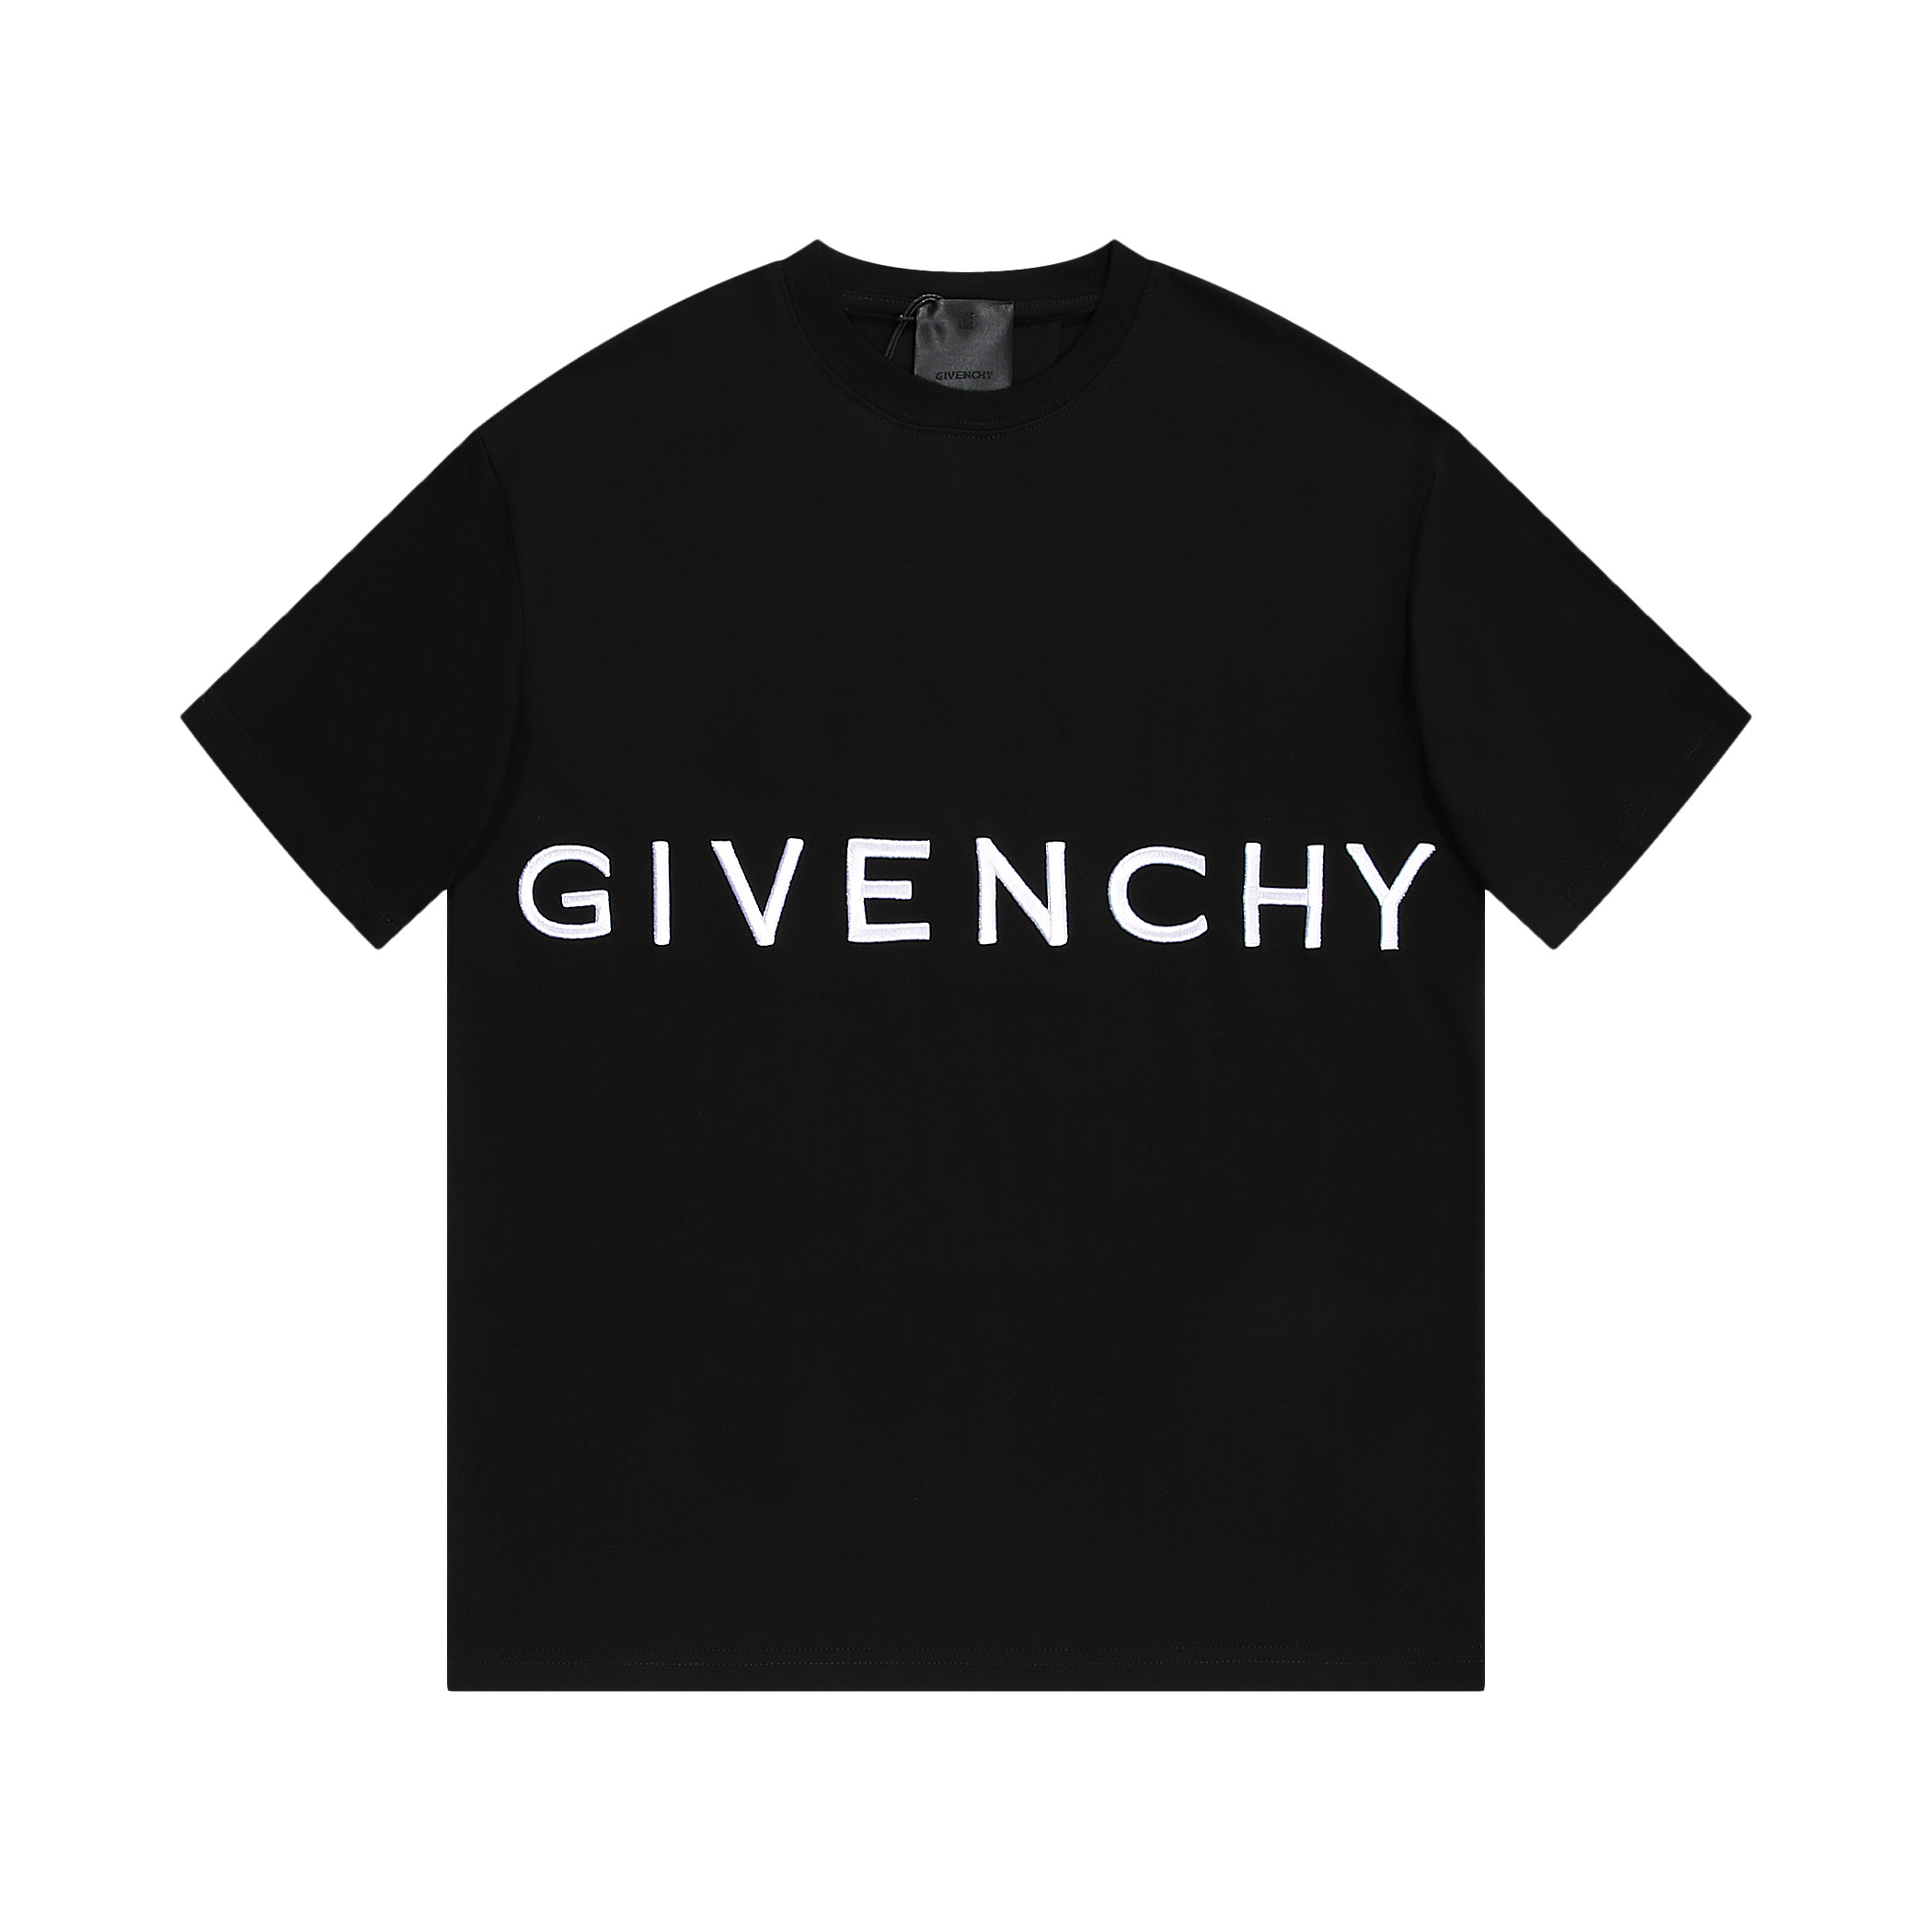 Givenchy Clothing T-Shirt Black Grey Embroidery Cotton Spring/Summer Collection Short Sleeve